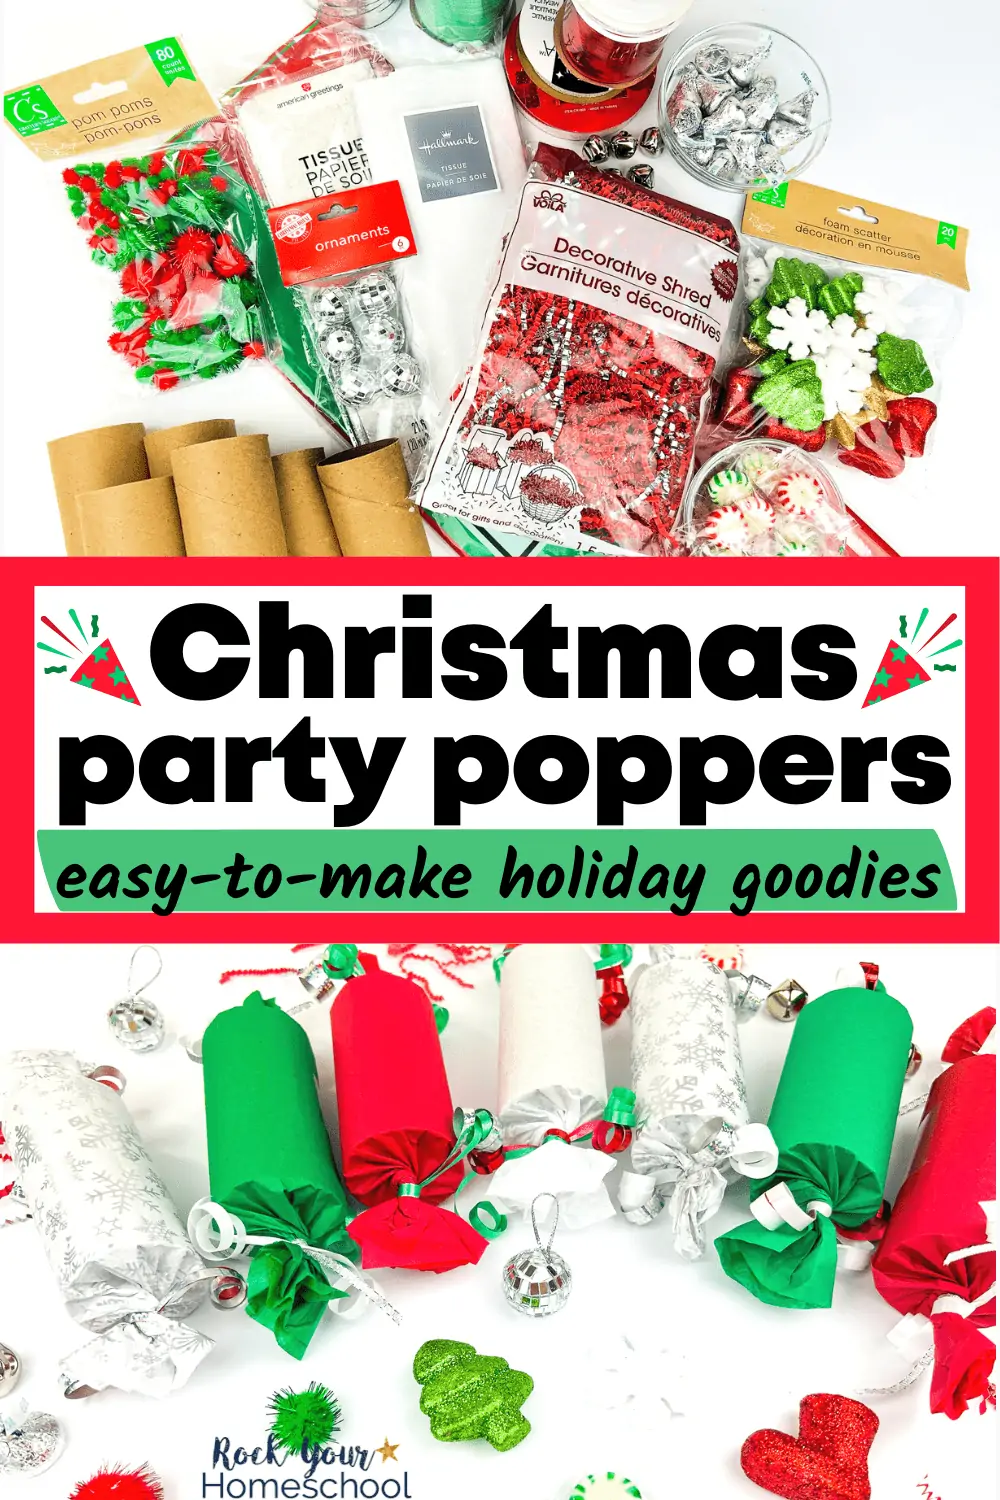 Christmas Party Poppers: How to Make & Enjoy for Frugal Holiday Fun